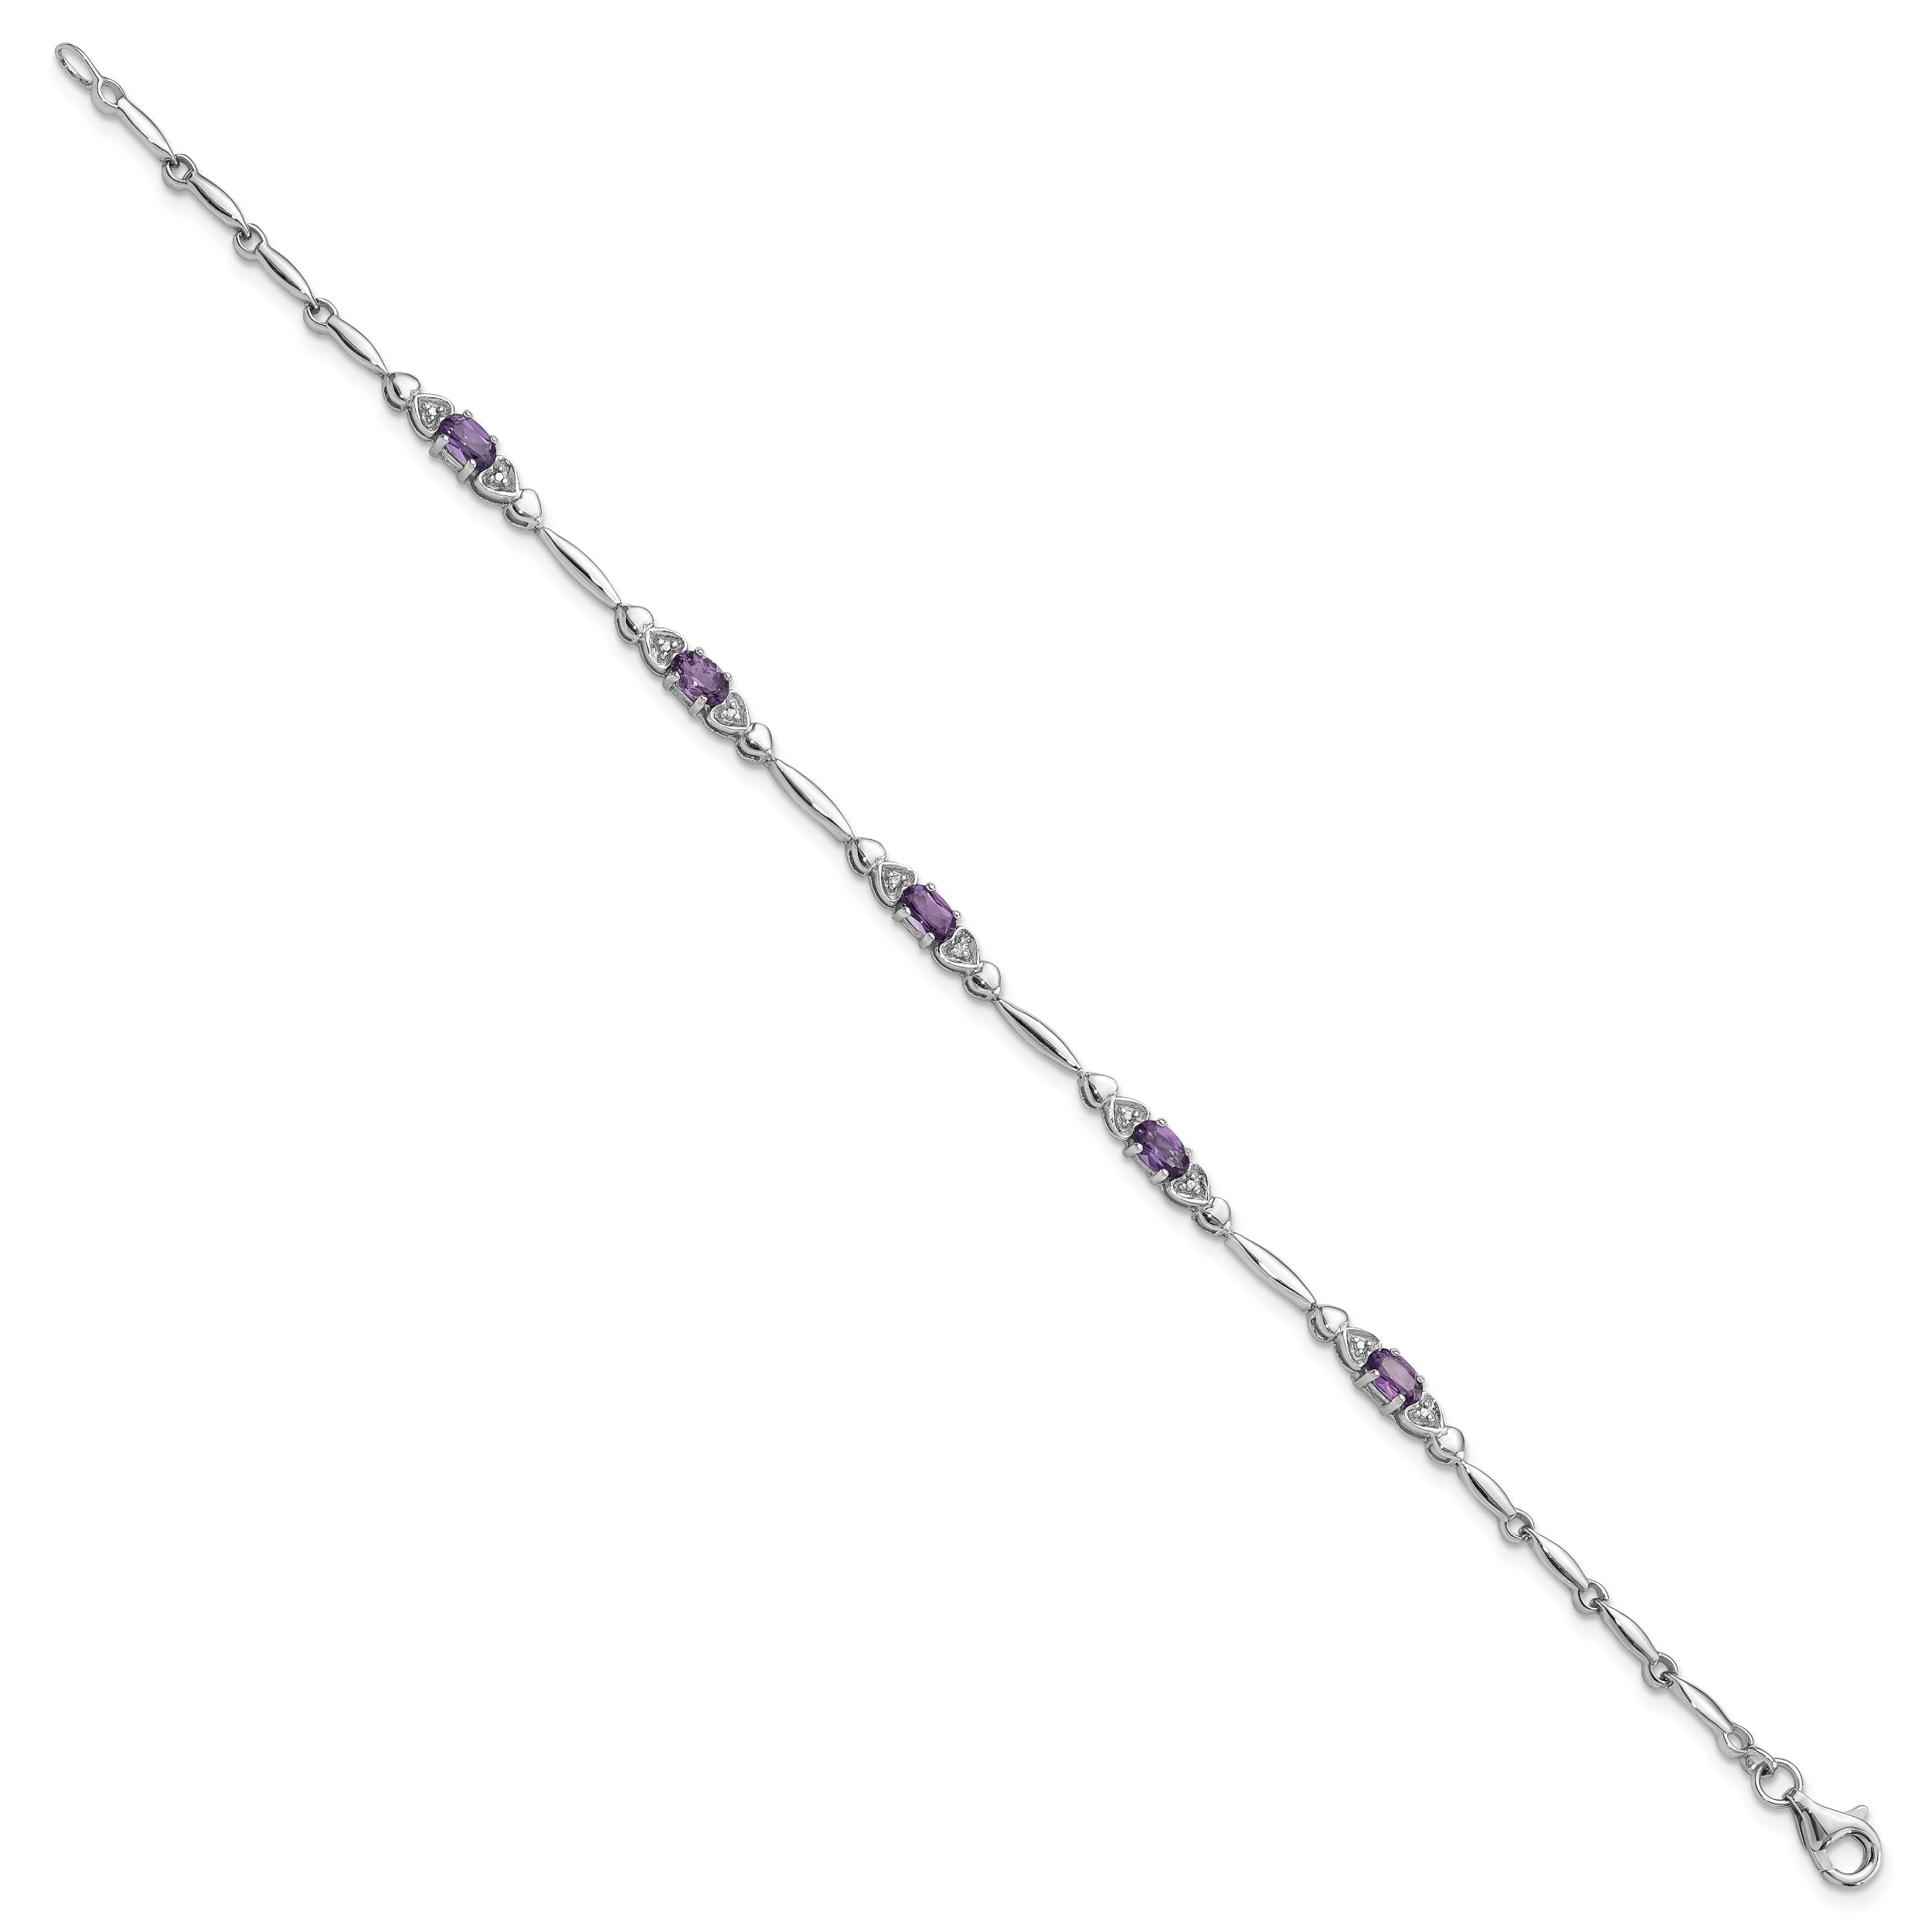 SS Rhodium-plated Amethyst and Diamond Heart 7.5in Bracelet